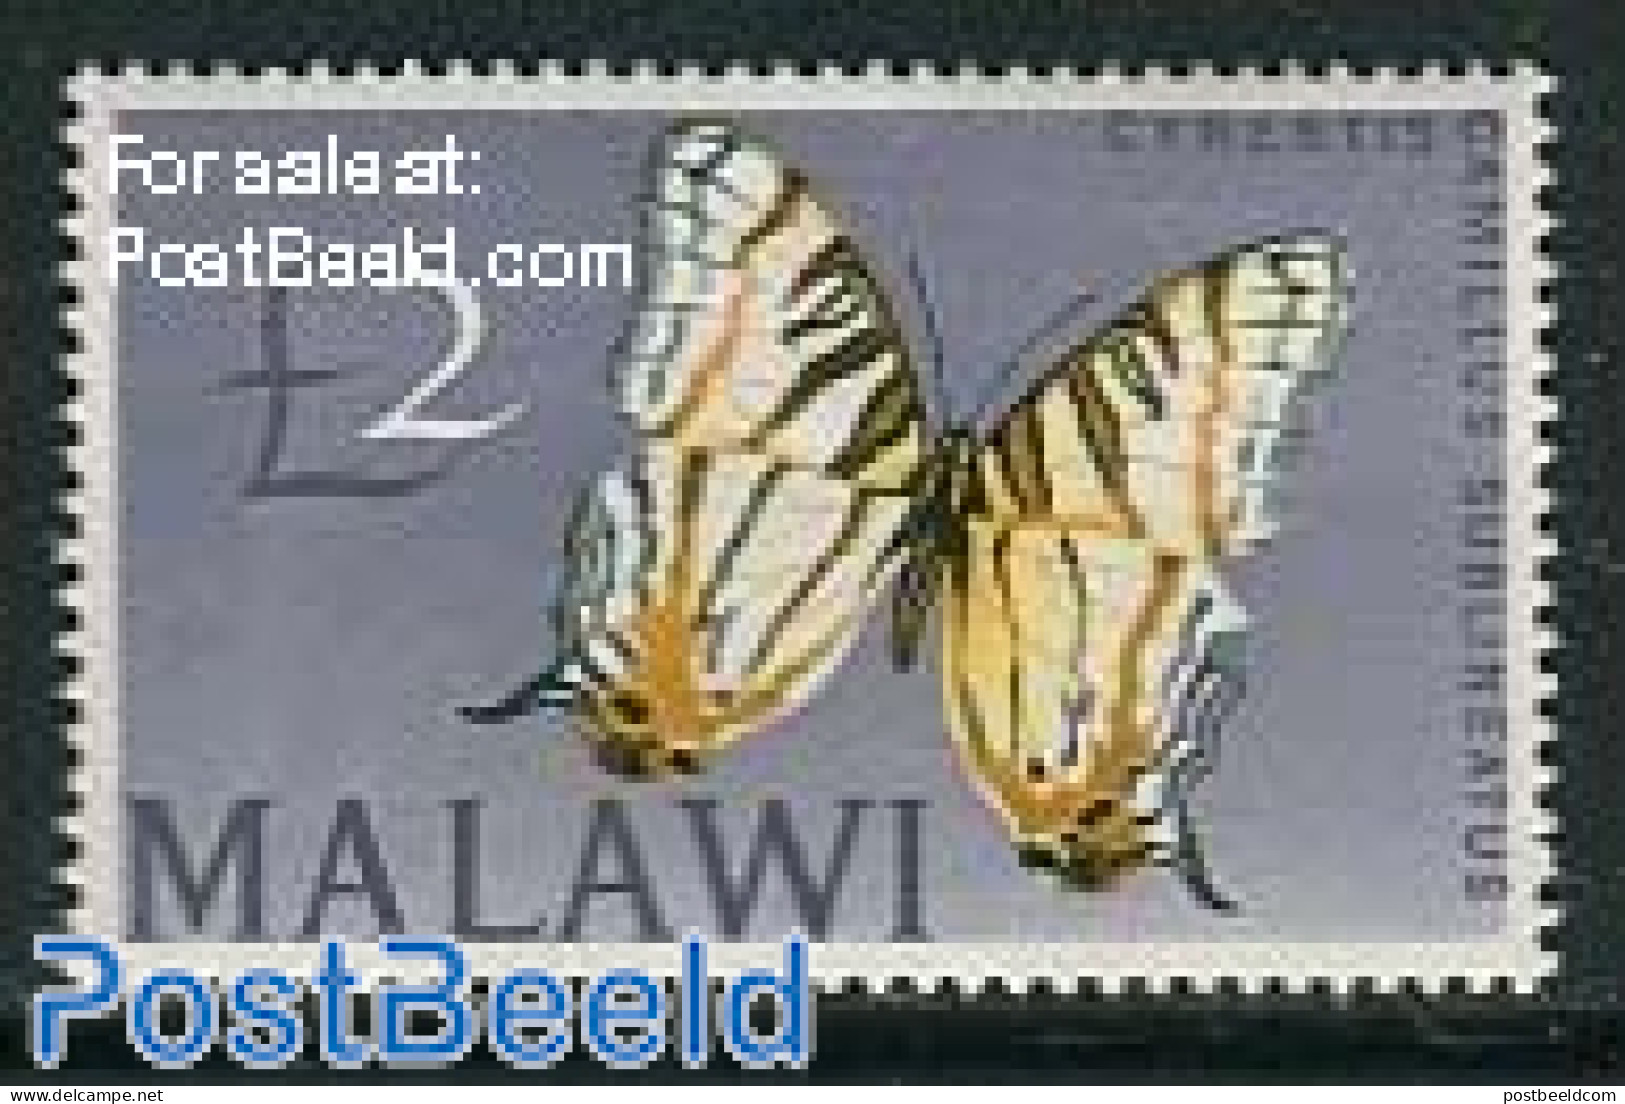 Malawi 1966 2pound, Stamp Out Of Set, Unused (hinged), Nature - Butterflies - Malawi (1964-...)